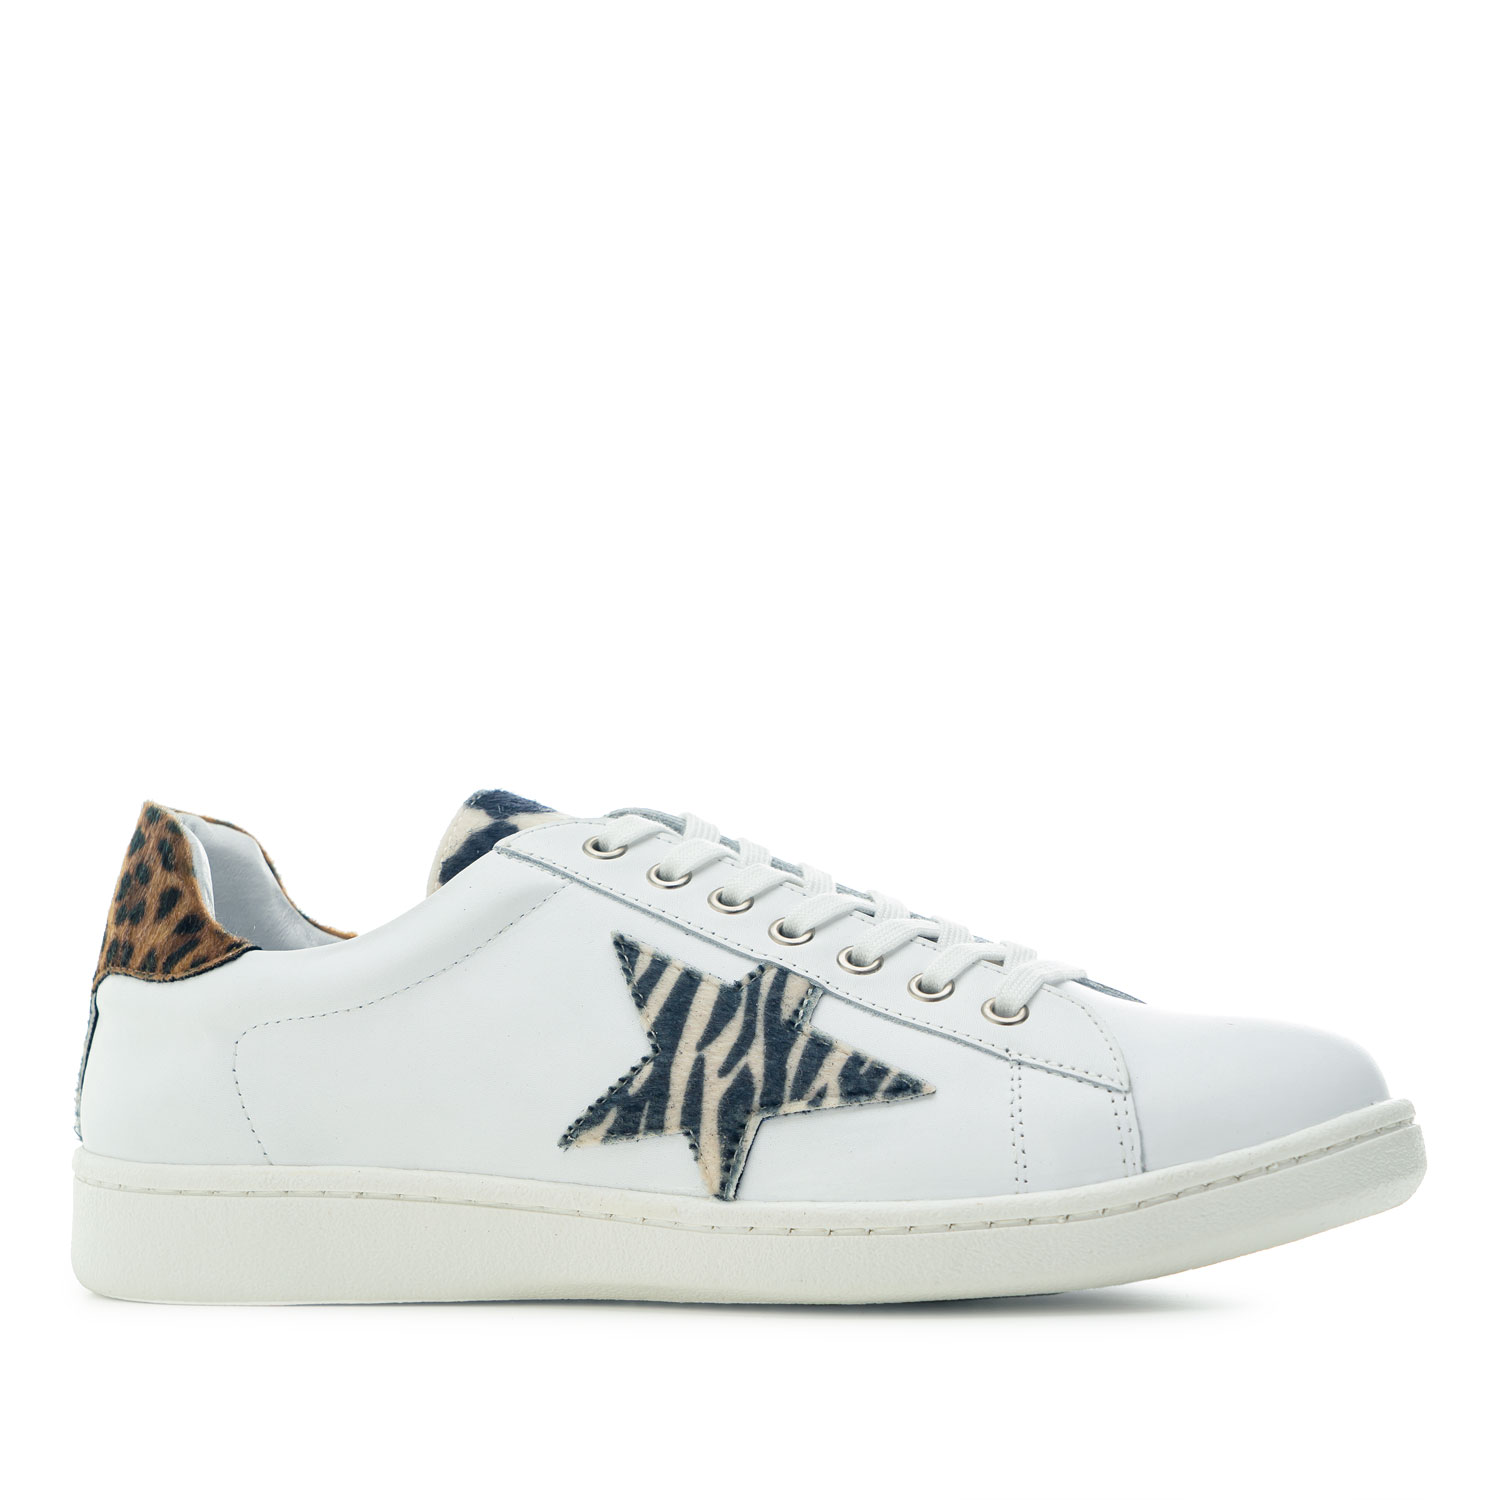 Trainers in White Leather with Animal Print detail 